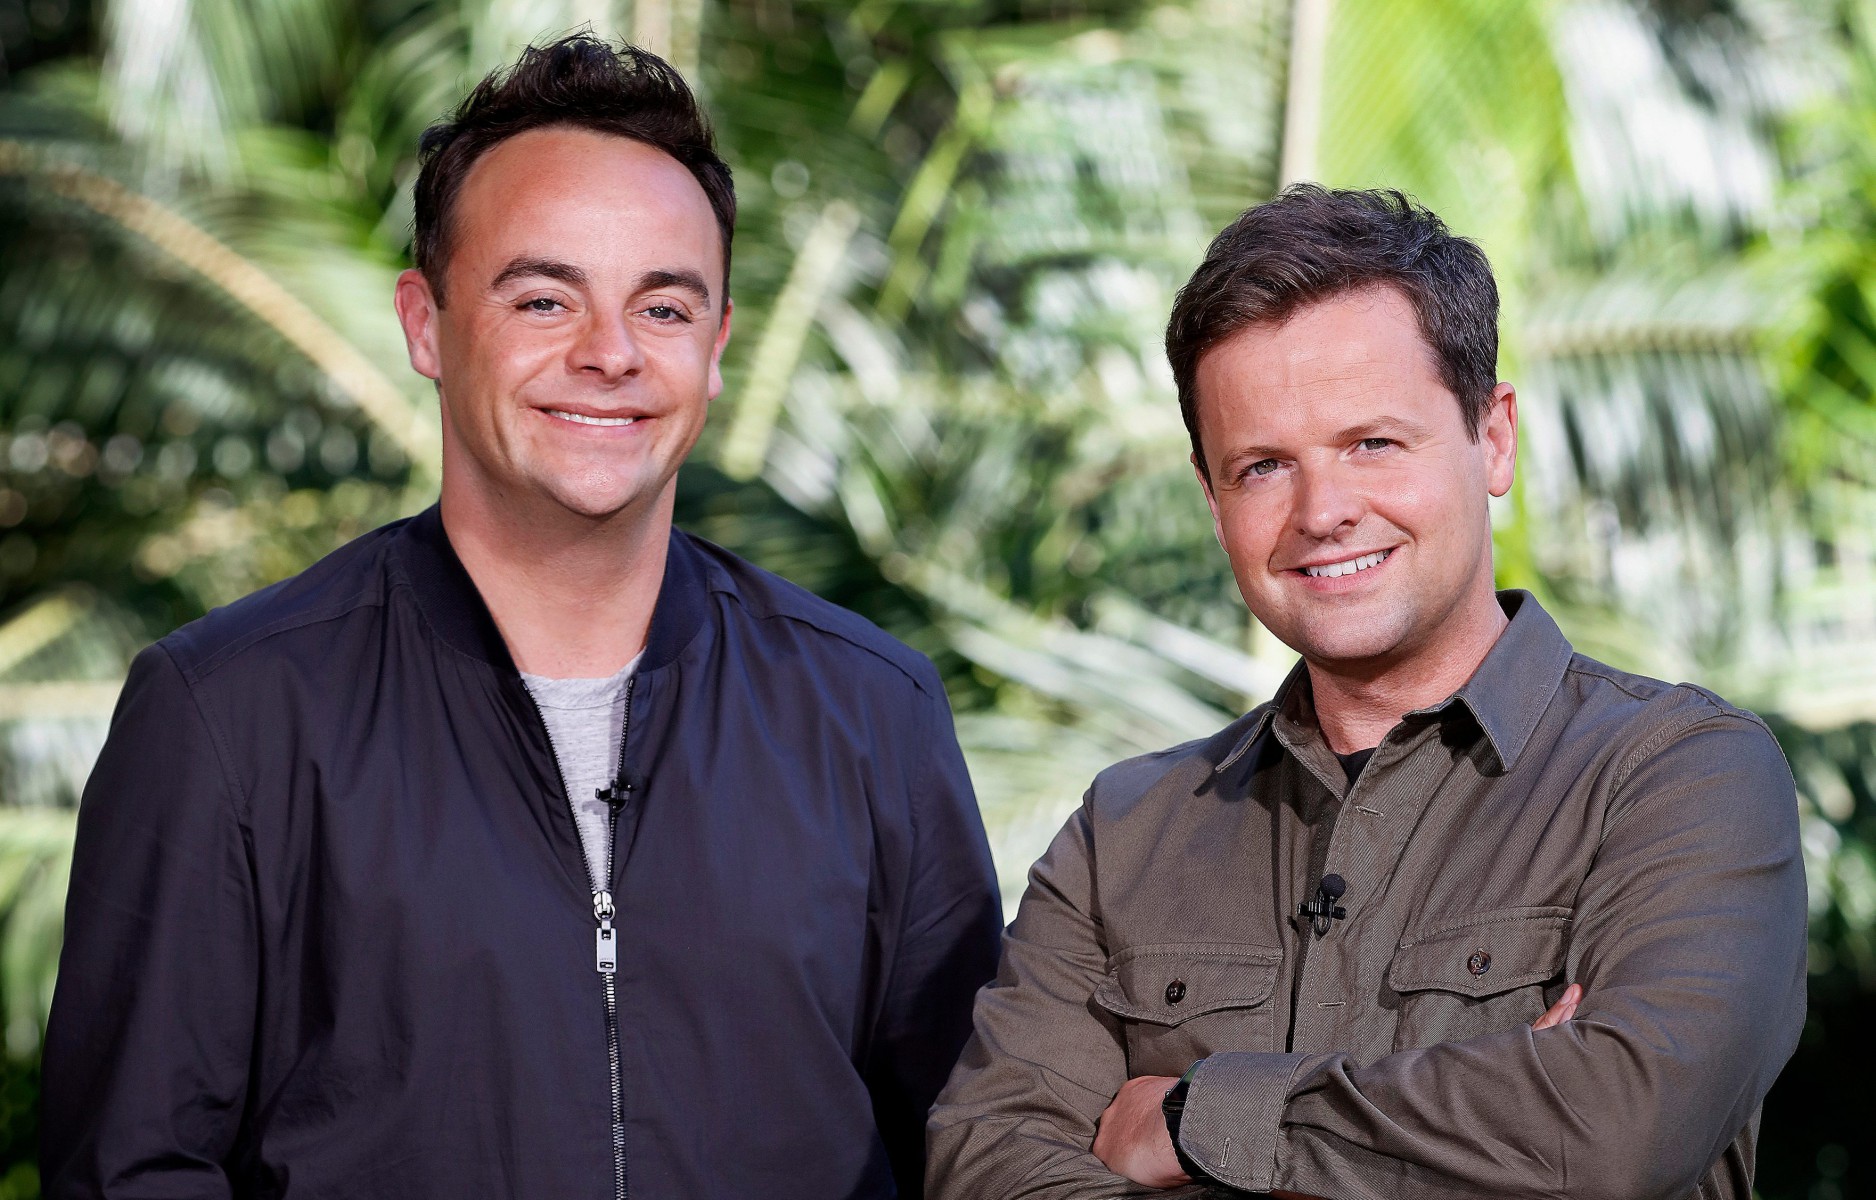 Ant will be joining Dec in 2019 after skipping last season's run